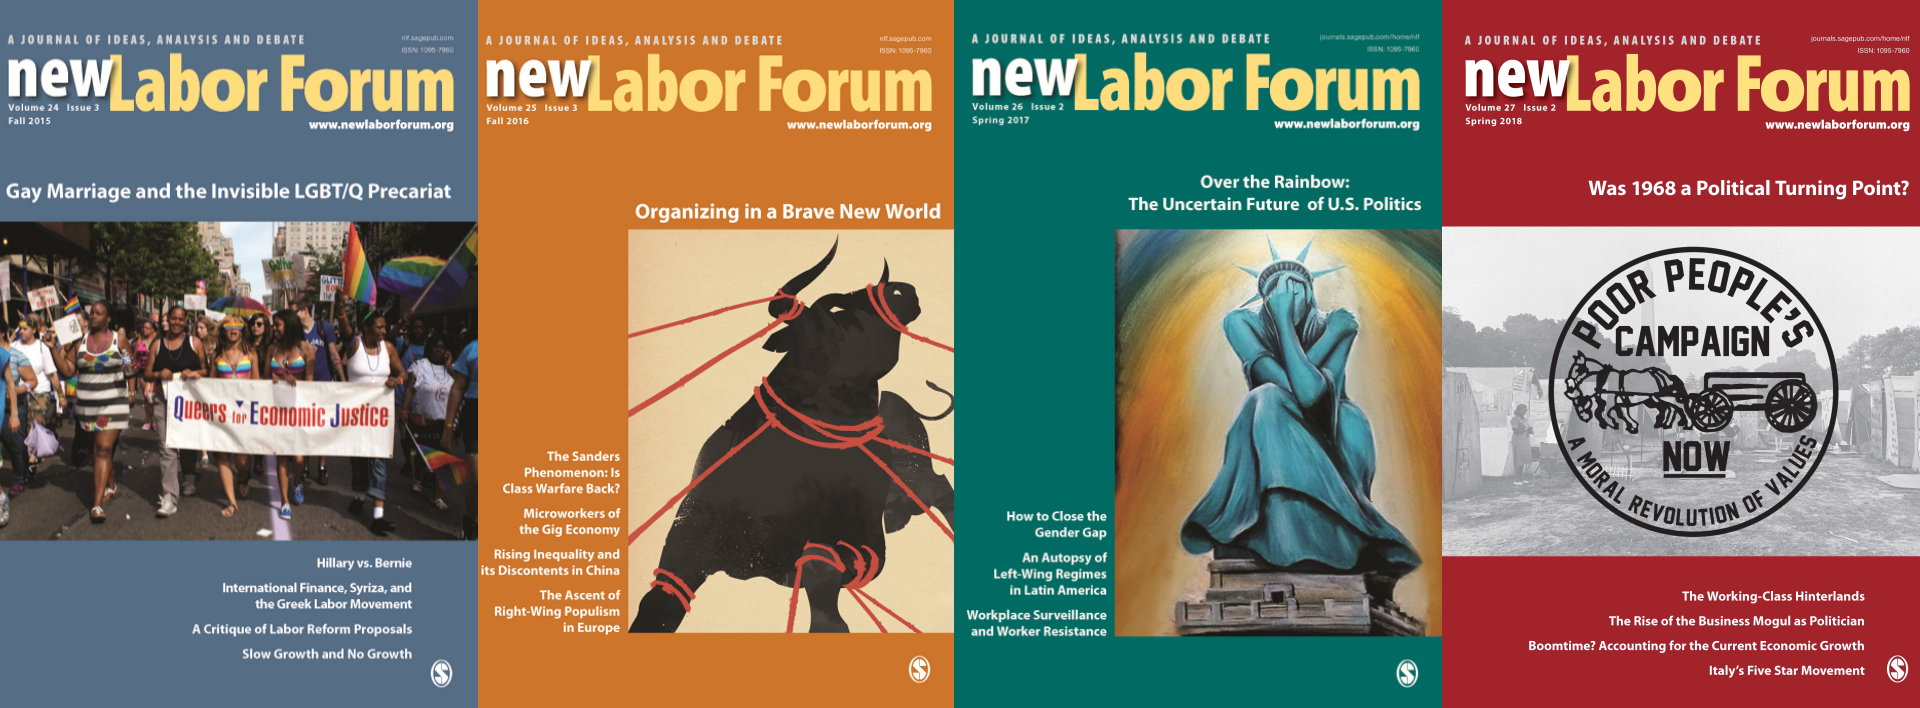 New Labor Forum journal covers